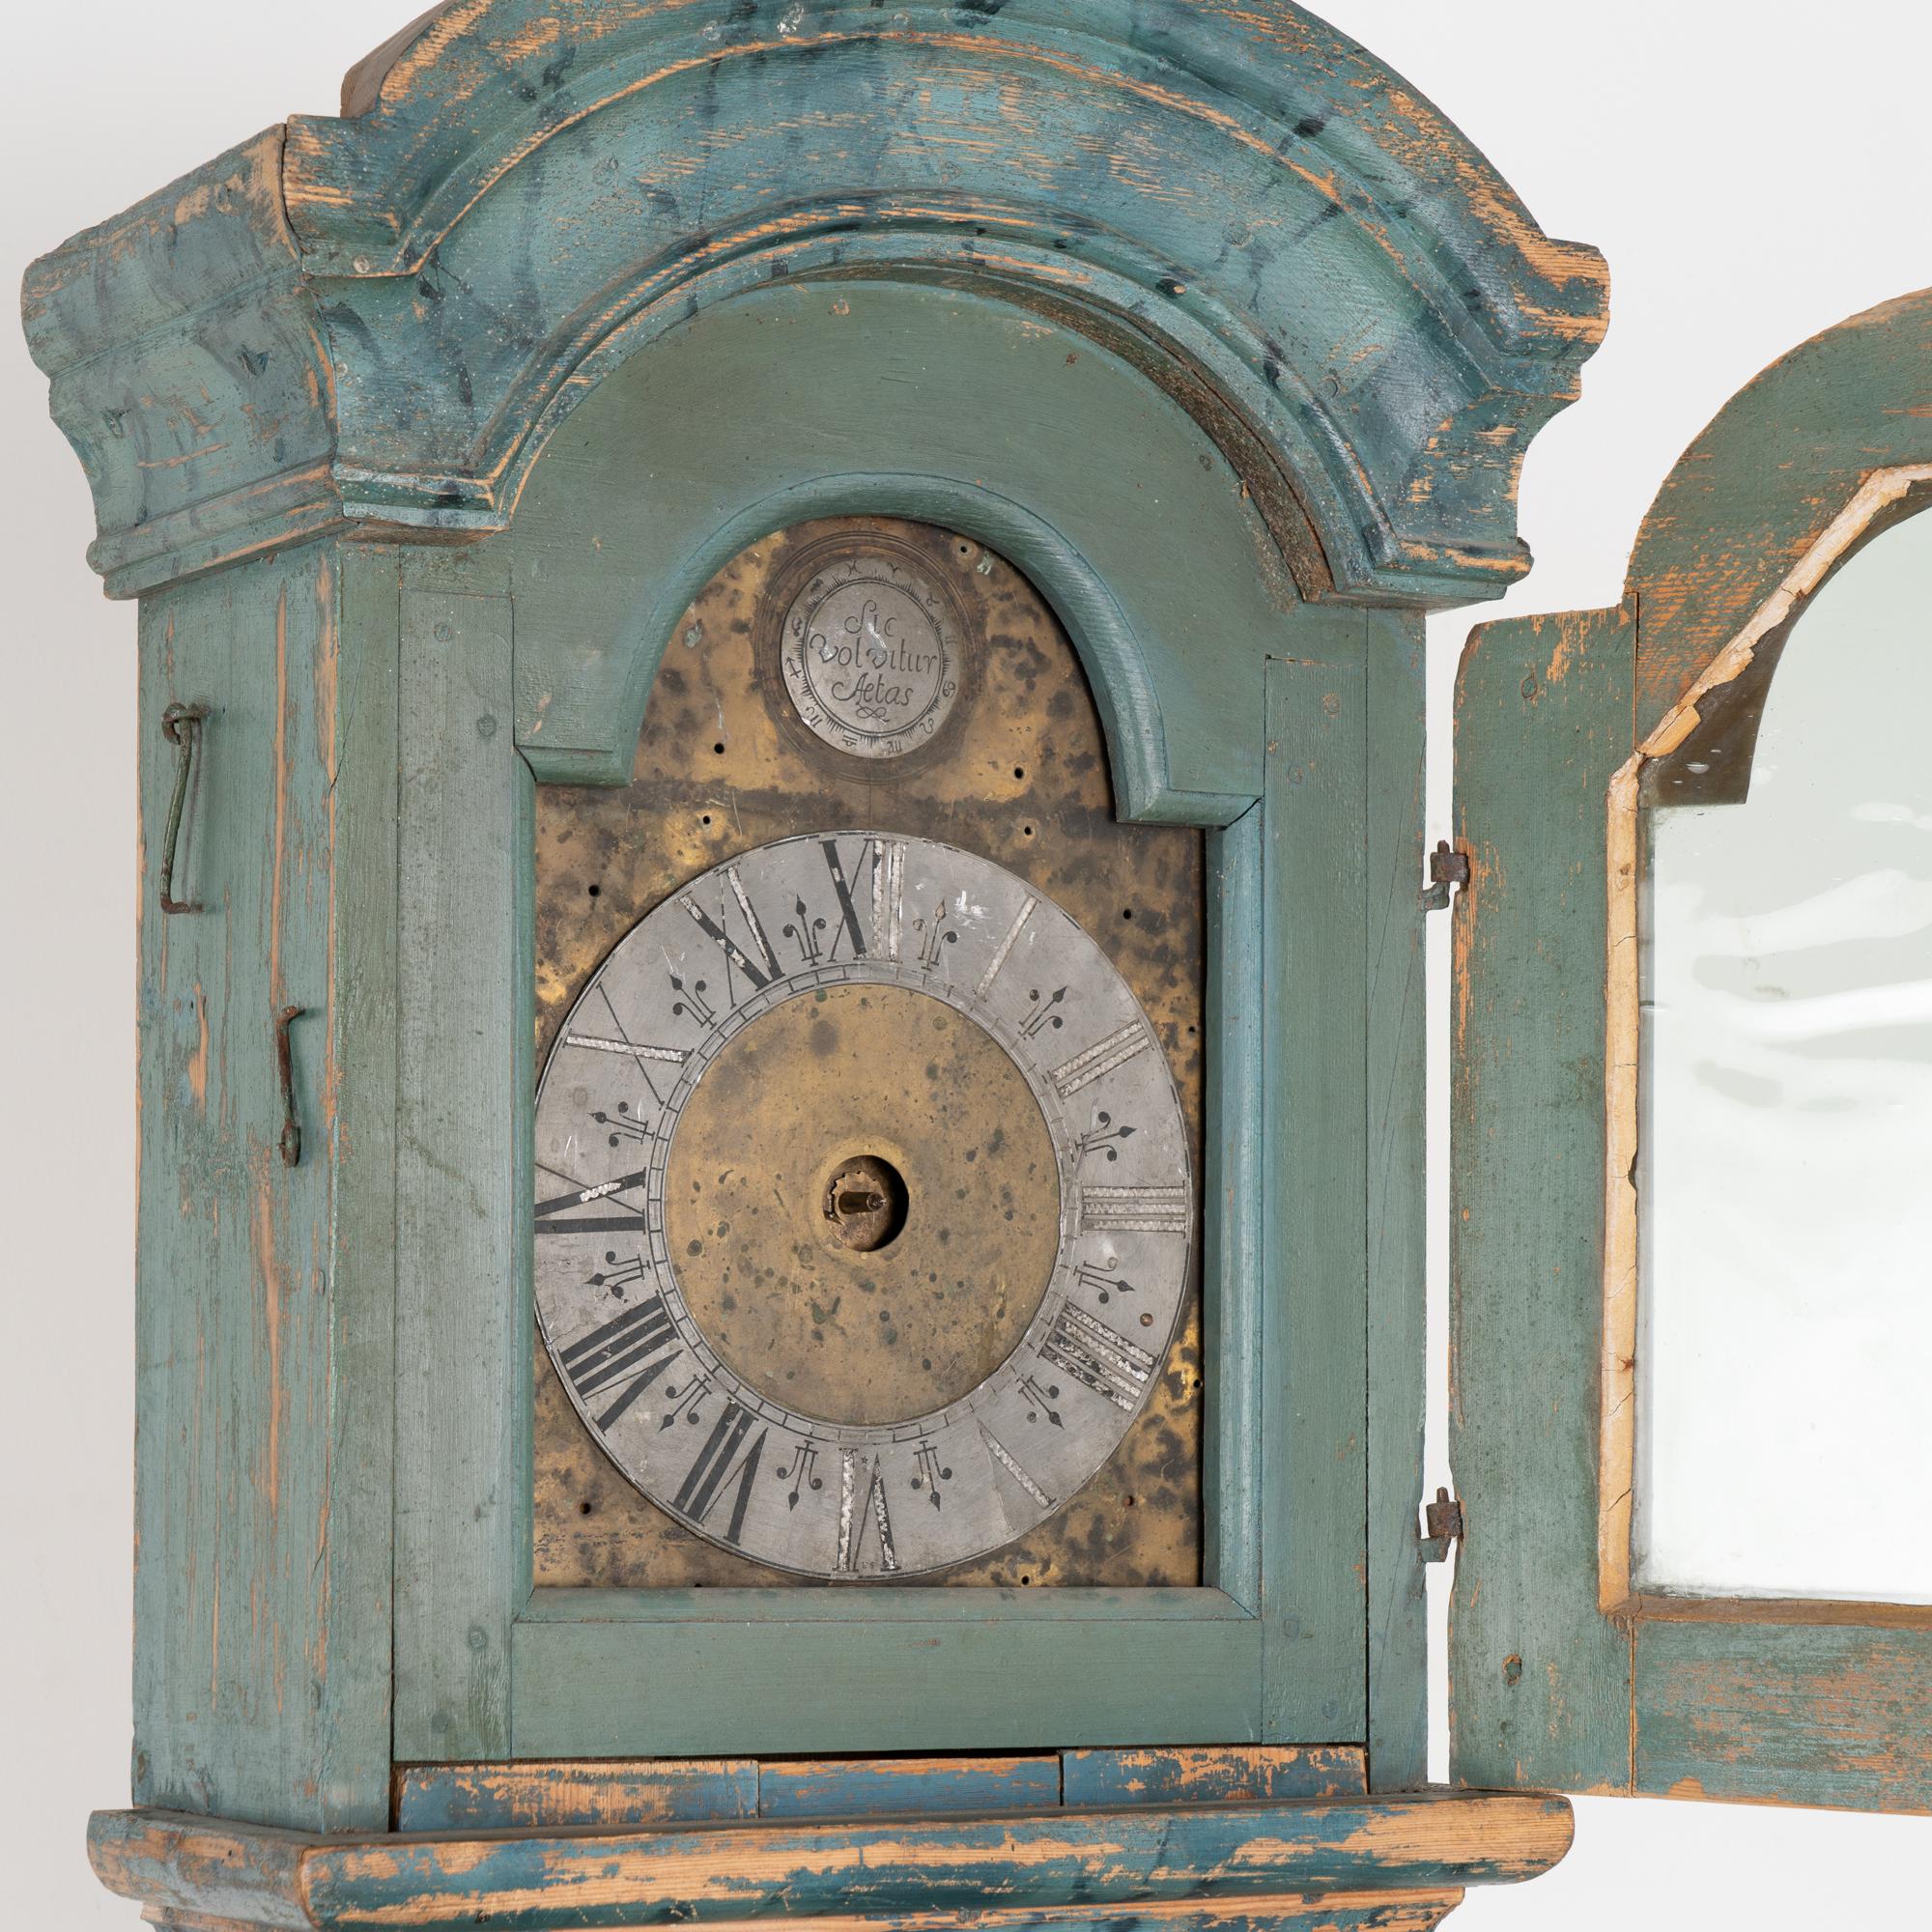 Original Blue Painted Swedish Mora Grandfather Clock, circa 1800-20 In Good Condition For Sale In Round Top, TX